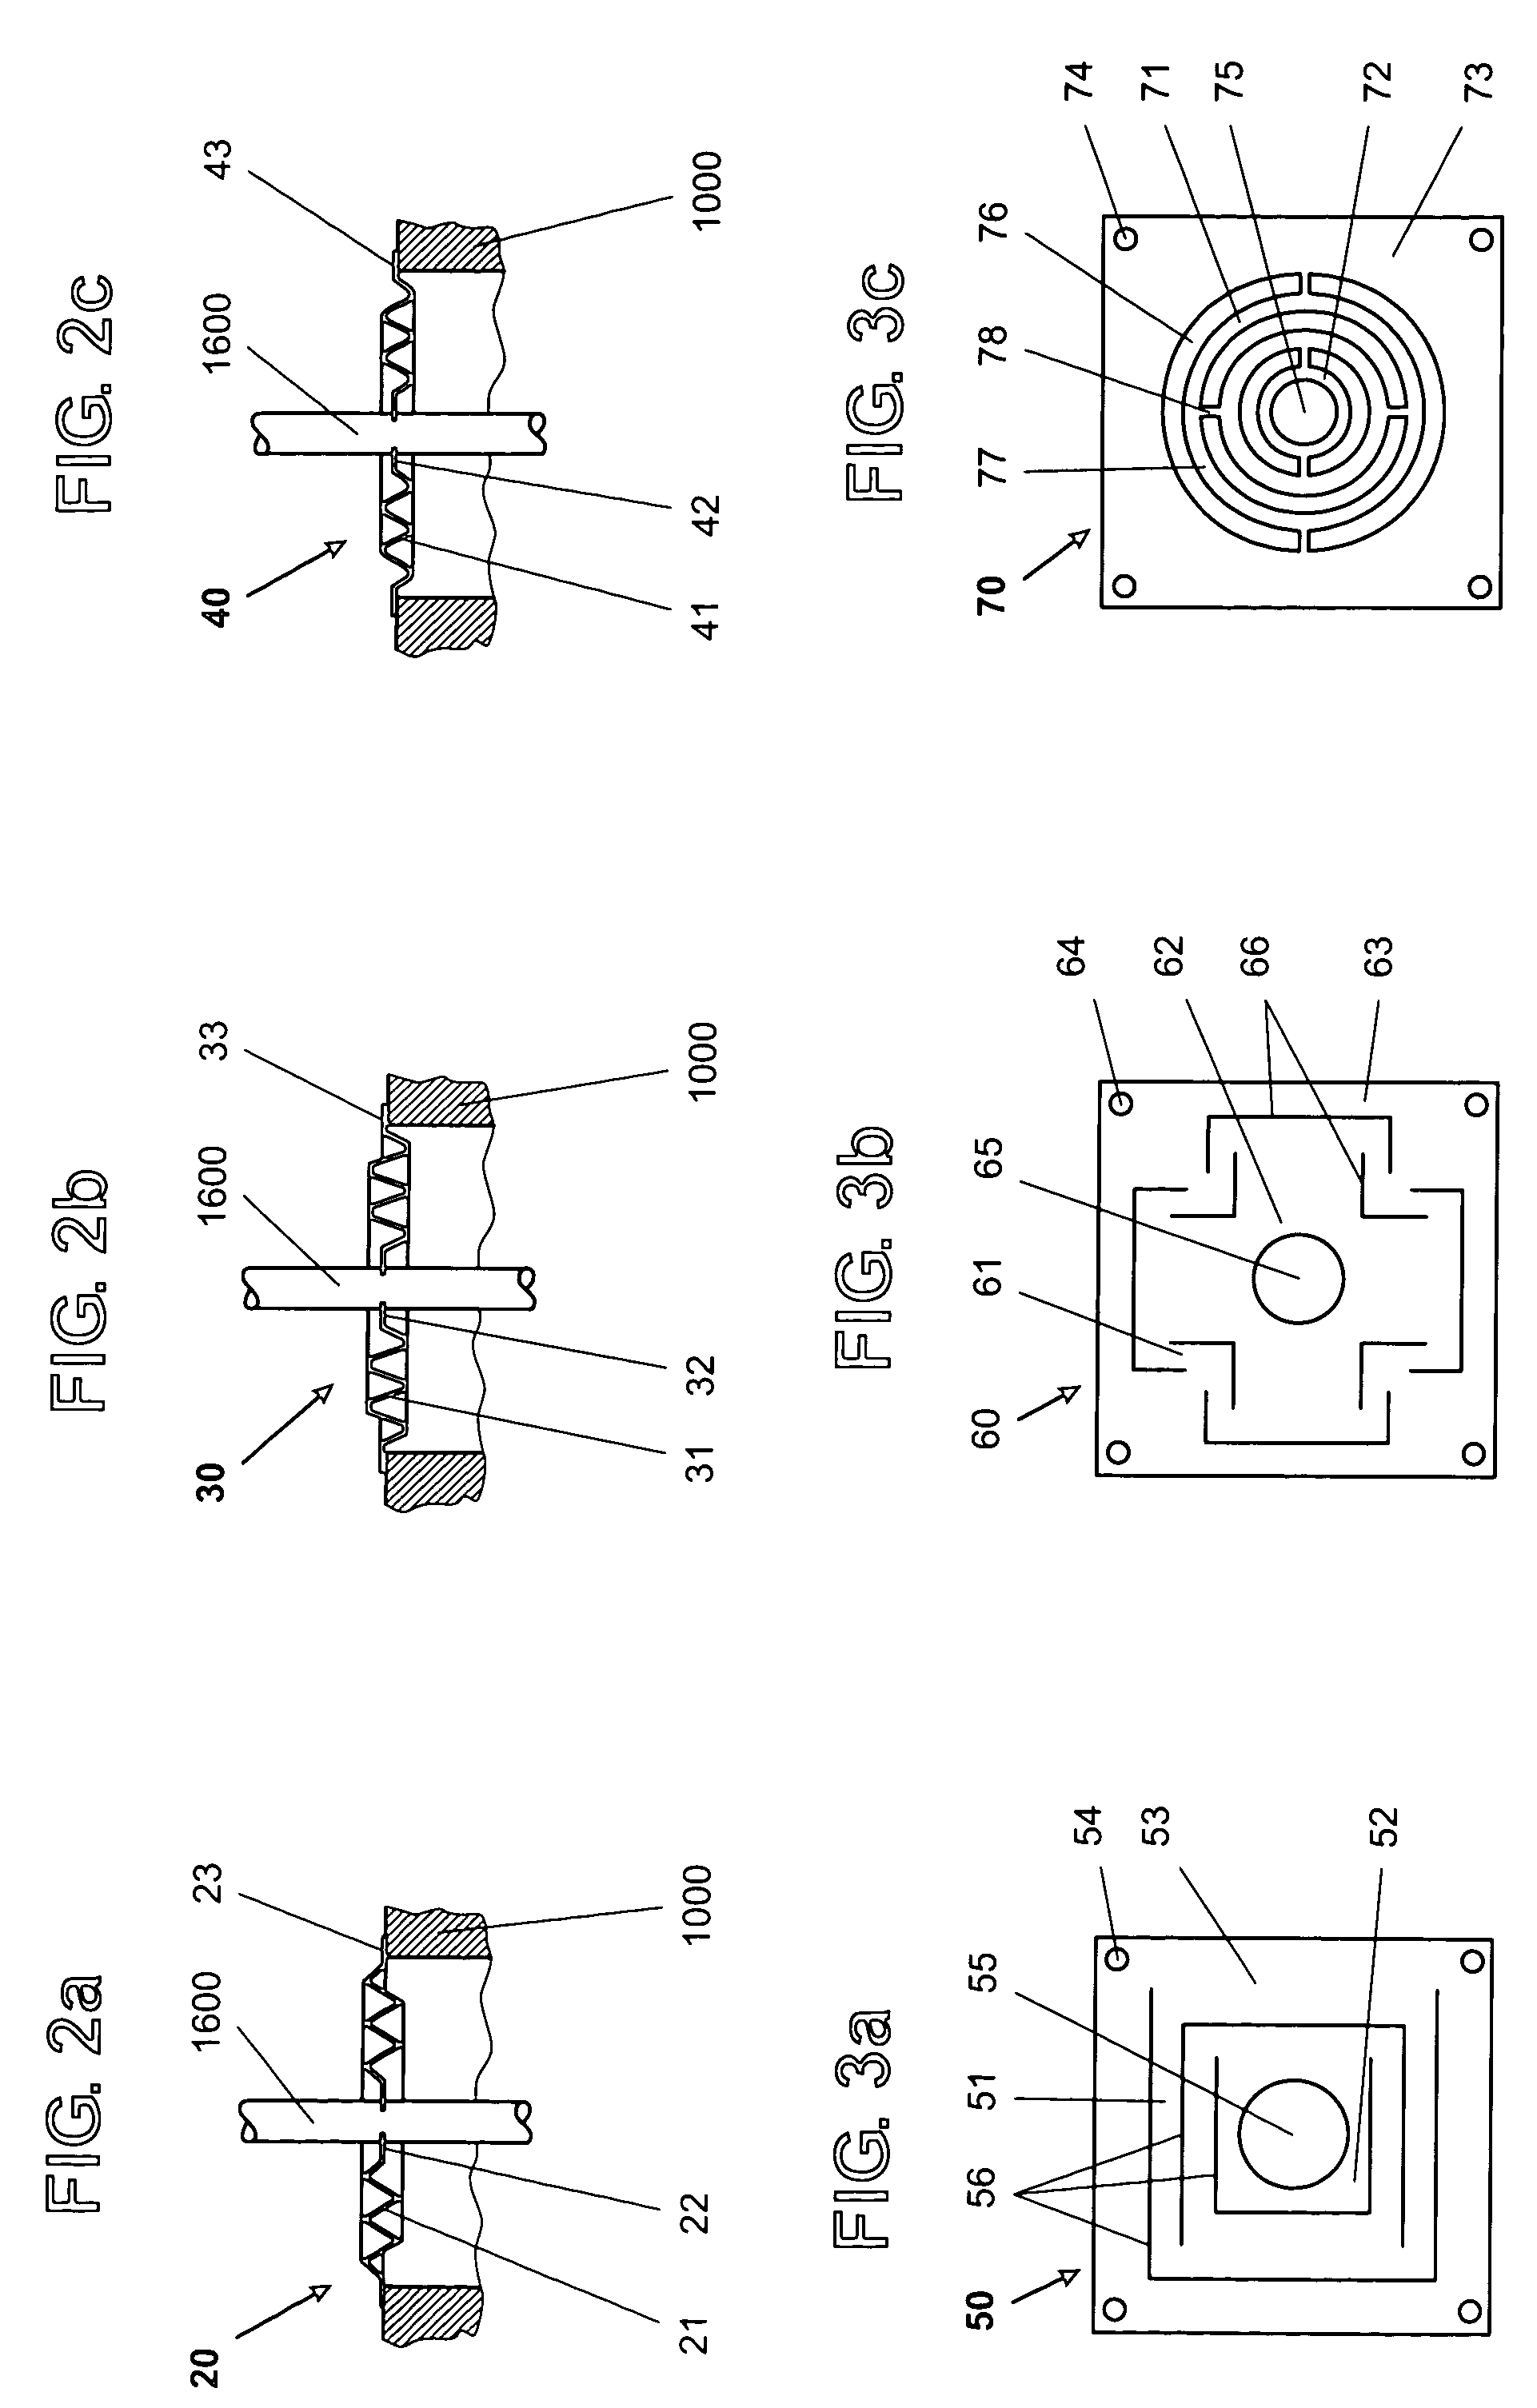 Parallel-guiding mechanism for compact weighing system